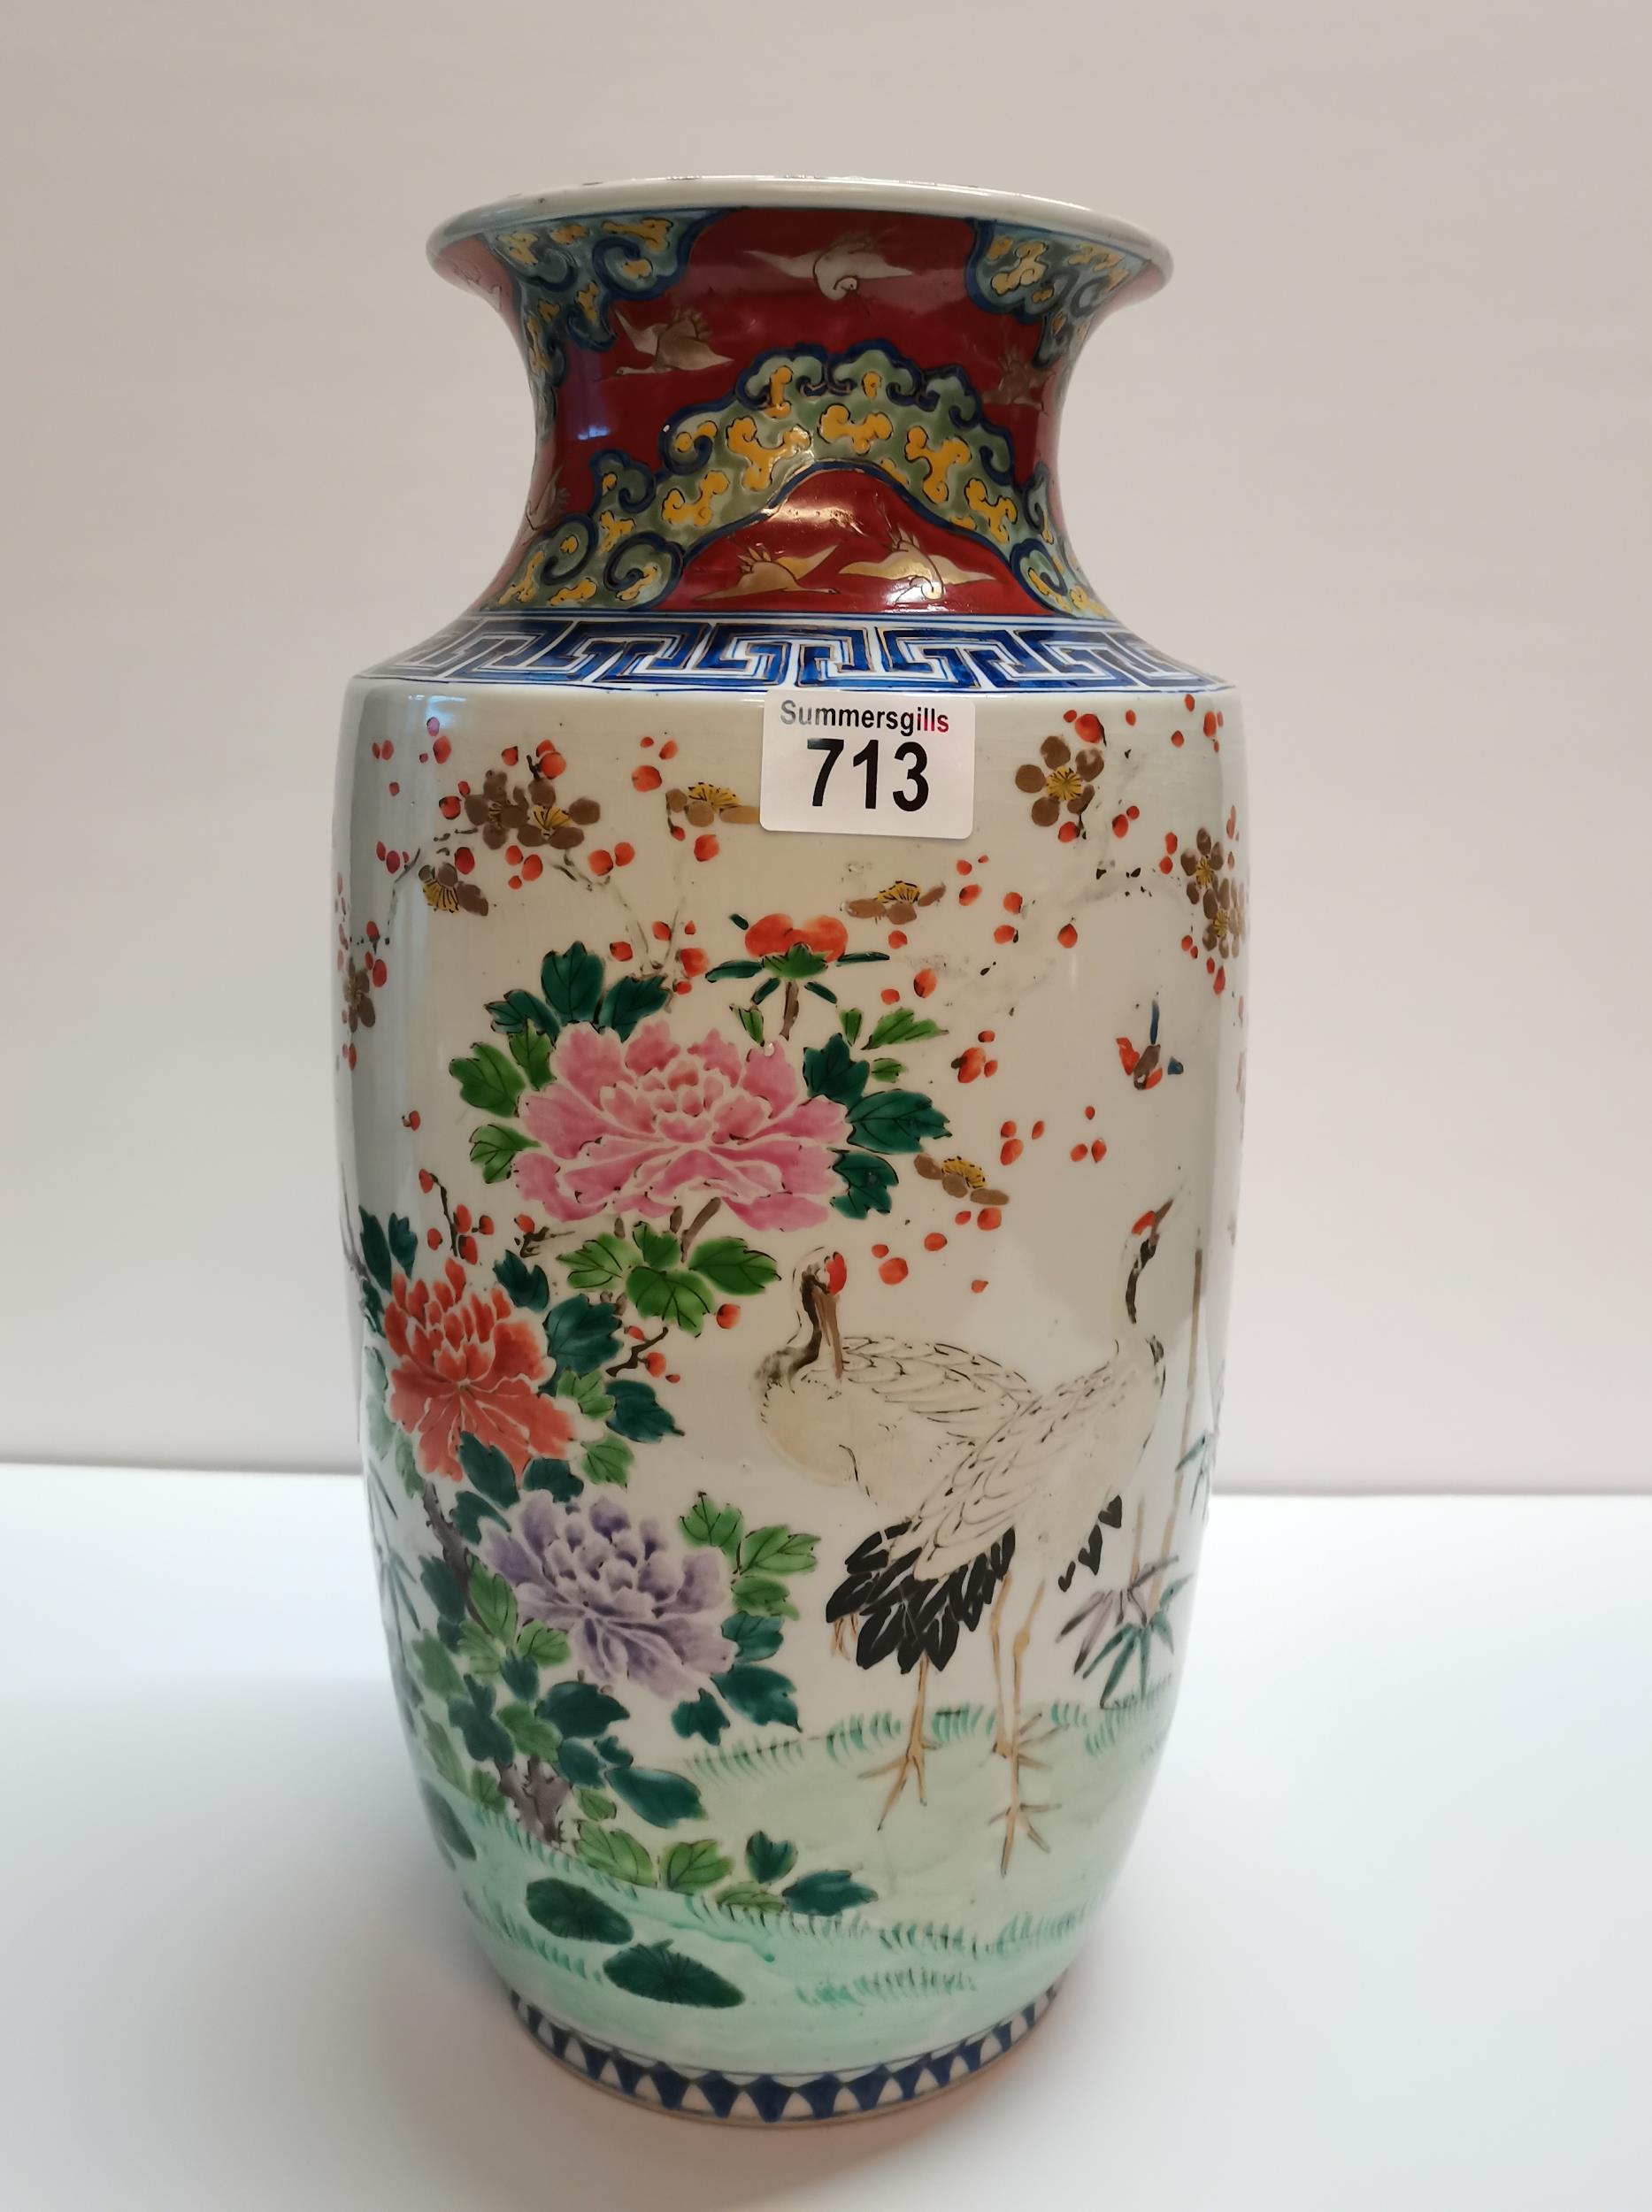 Large Chinese Vase with stork decoration and 7 charter marks on the base. Hairline crack on top of